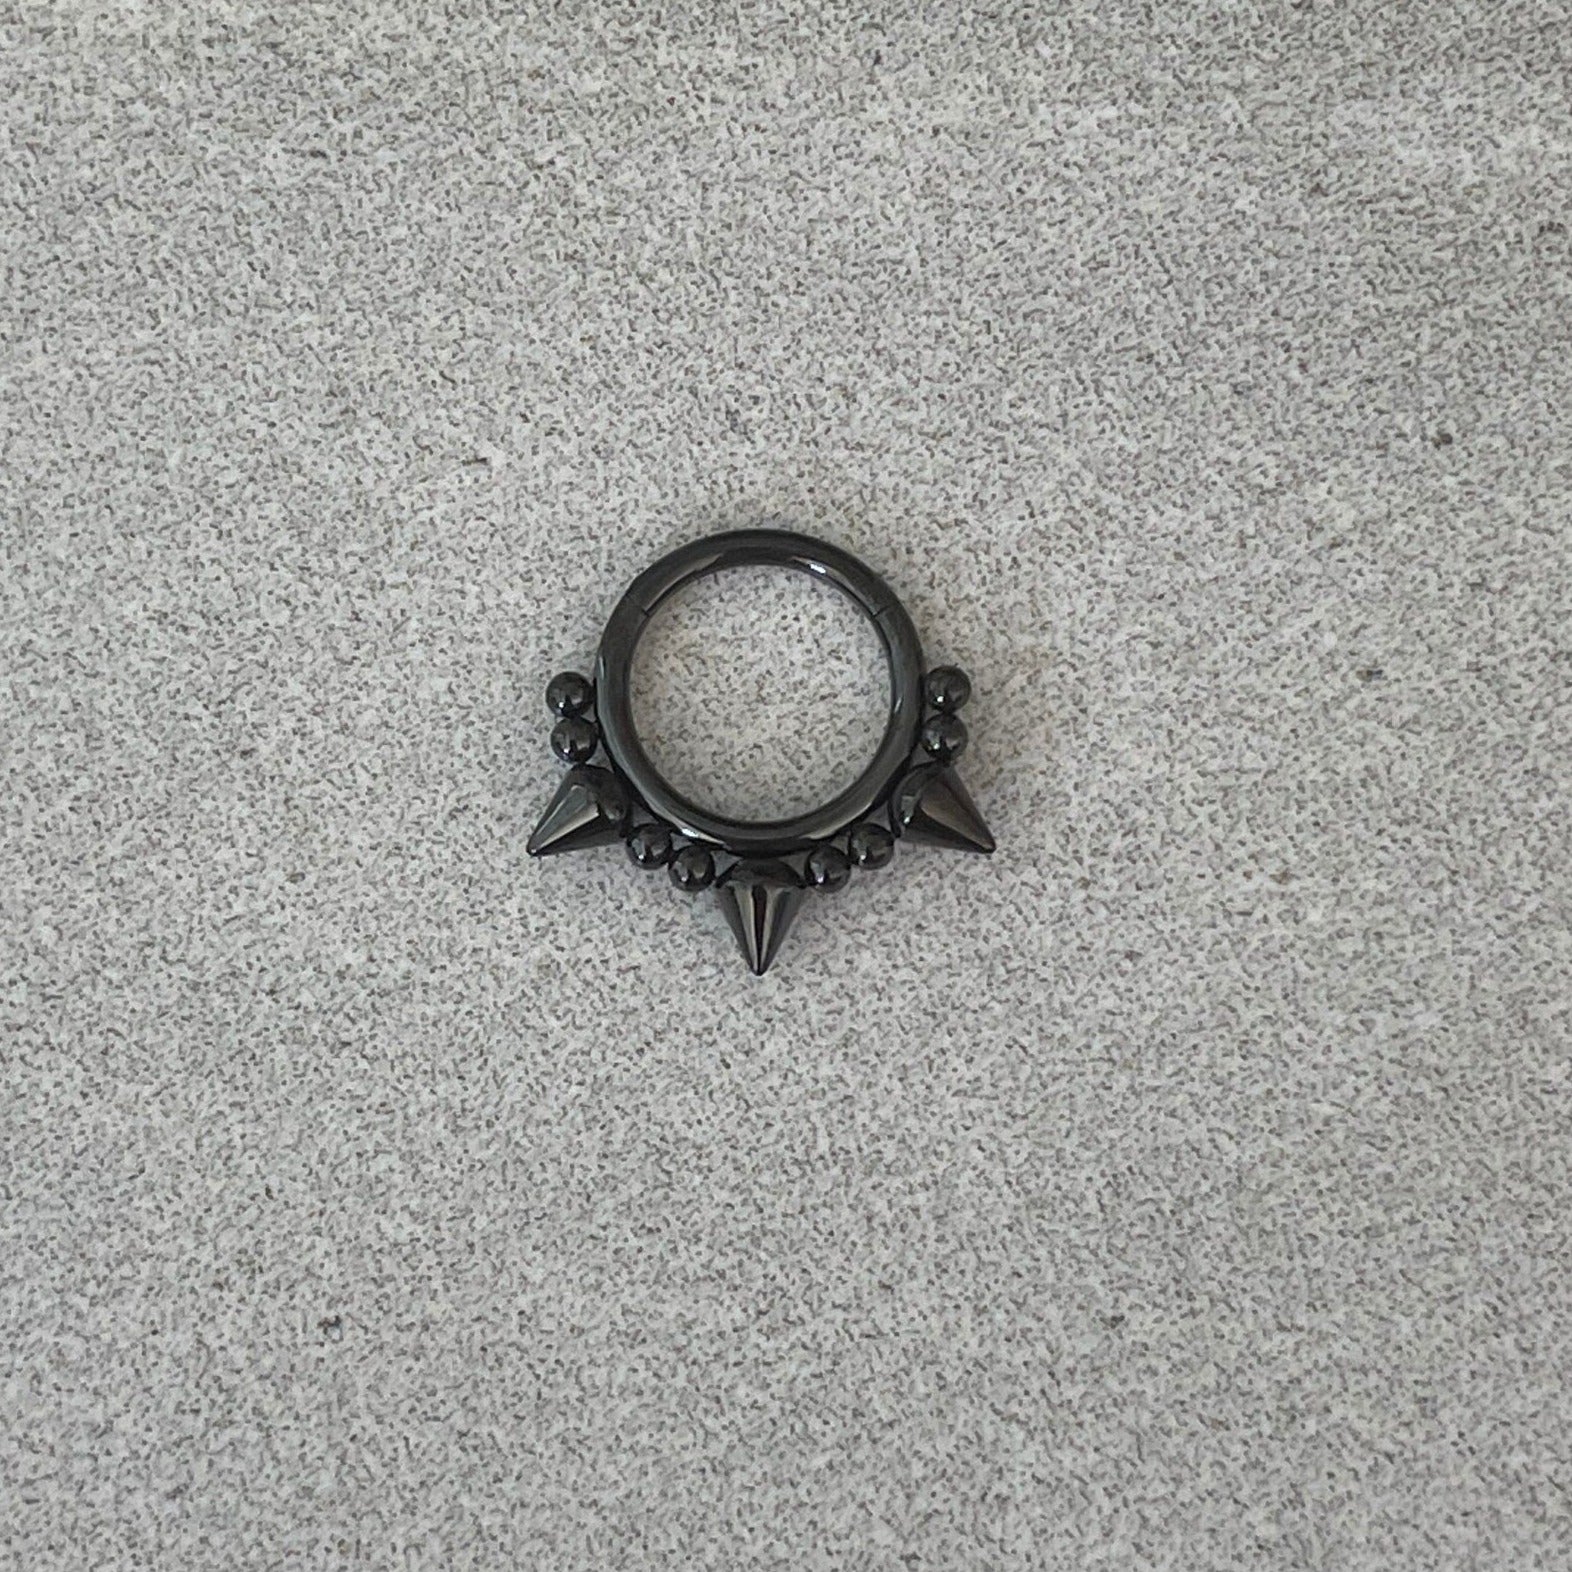 Spiked Septum Piercing (16G | 8mm or 10mm | Surgical Steel | Black, Silver or Gold)